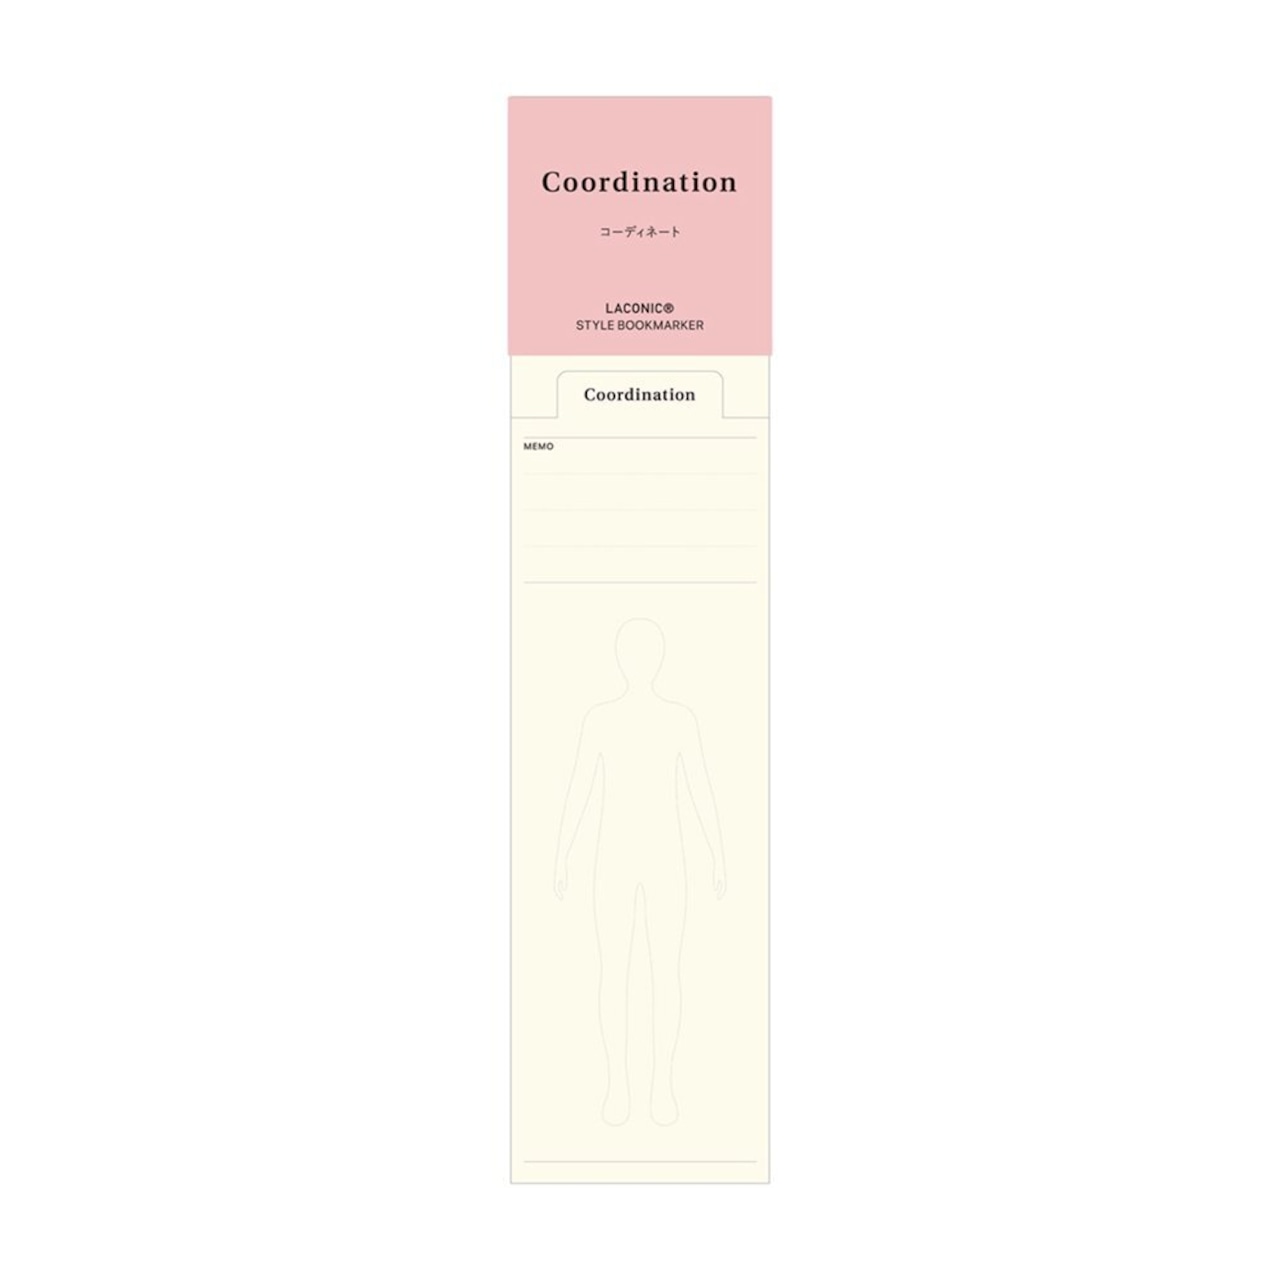 STYLE　BOOKMARKER